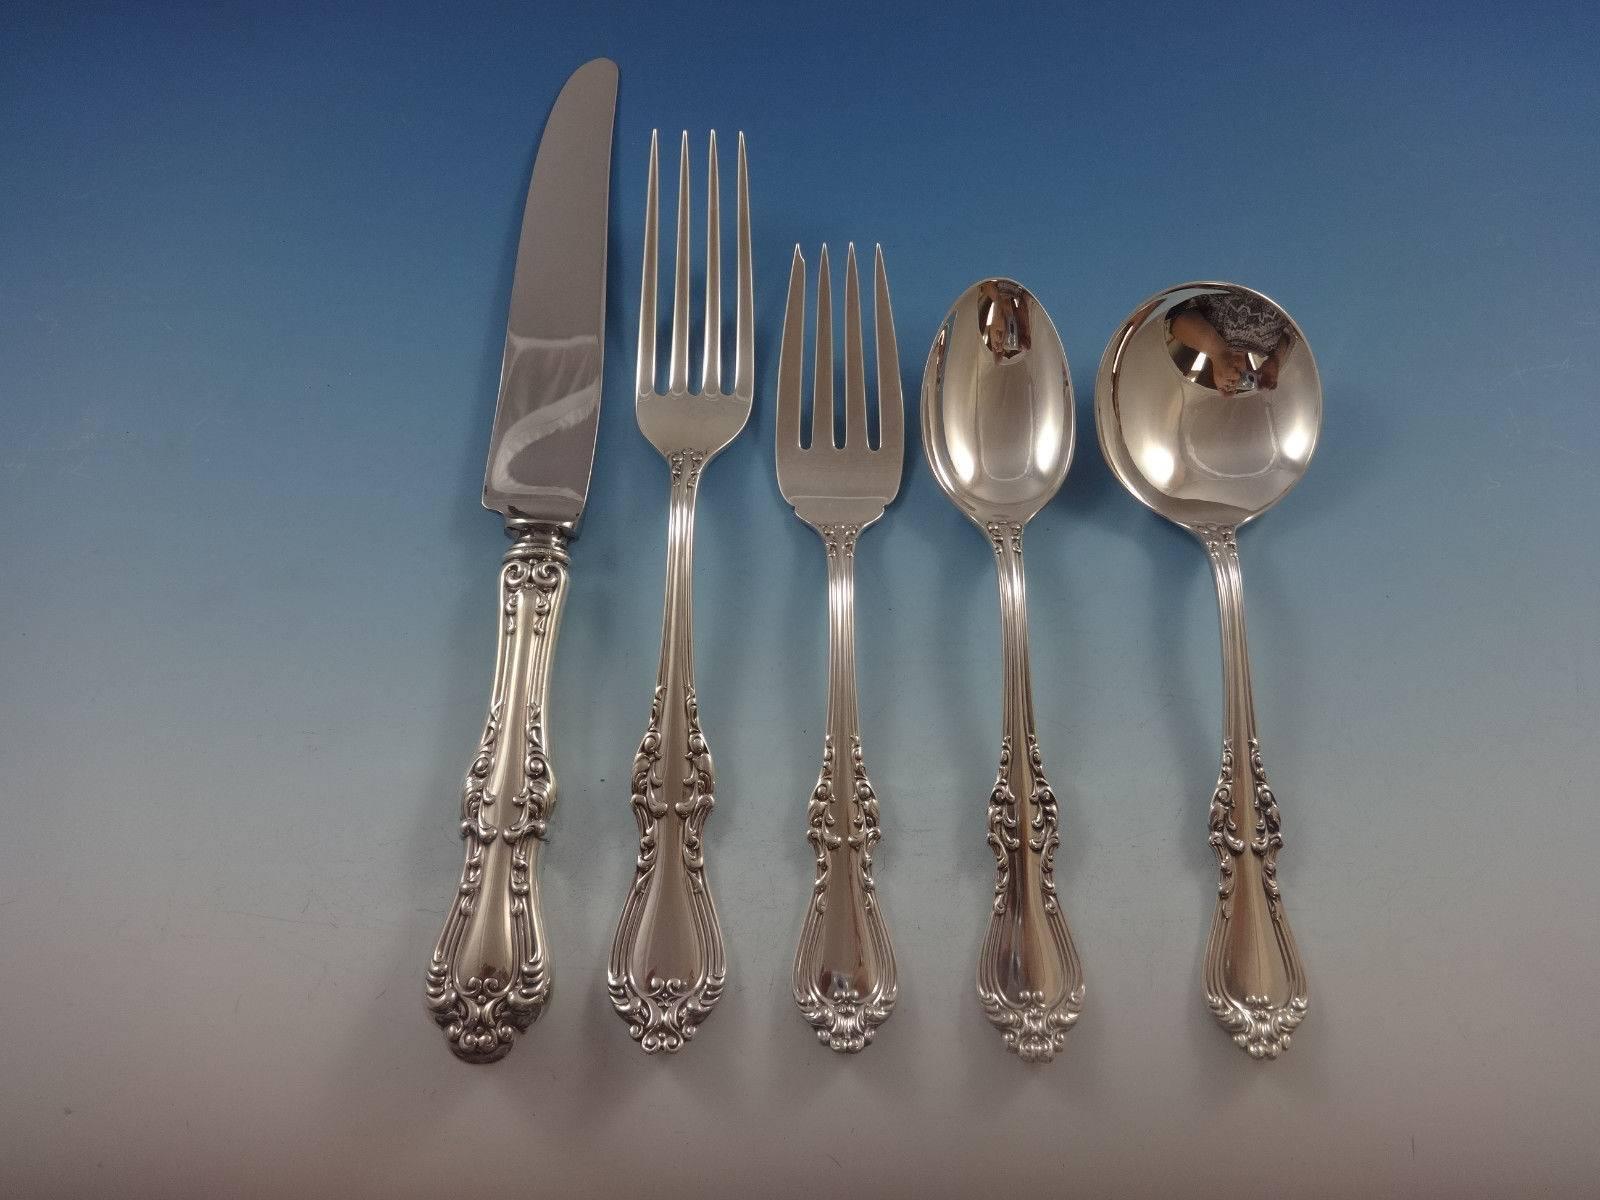 Countess, a stately flatware design rich with ornamentation graces this regal pattern. An elegant addition to any table.

Beautiful Countess by Frank Smith sterling silver flatware set, 66 pieces. This set includes:

12 knives, 8 3/4